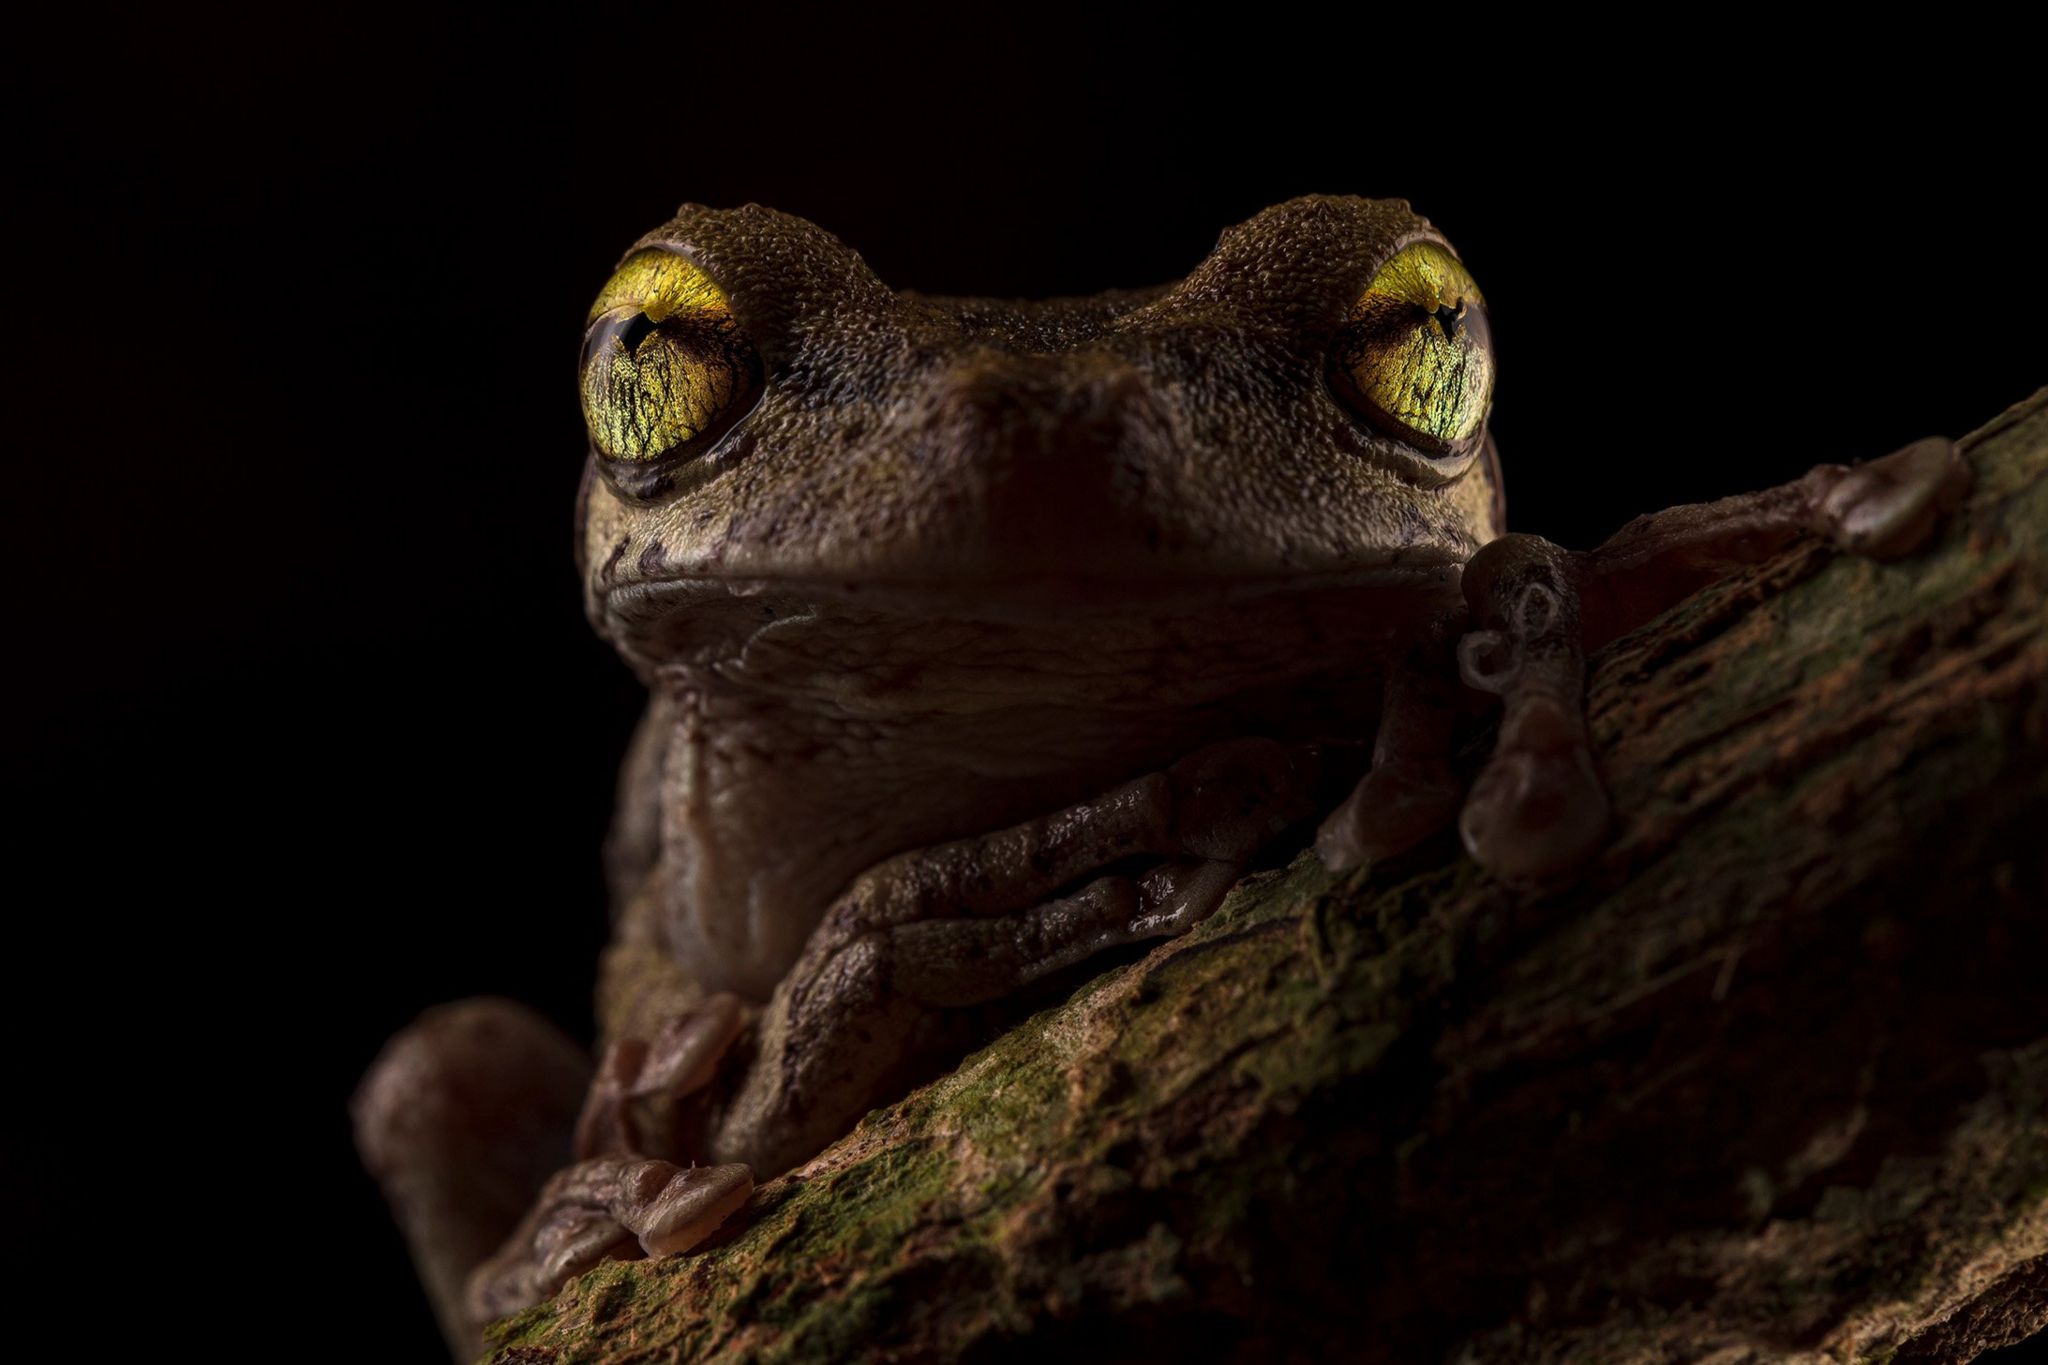 A Helena’s histrion   frog seen with eyes glowing successful  the darkness